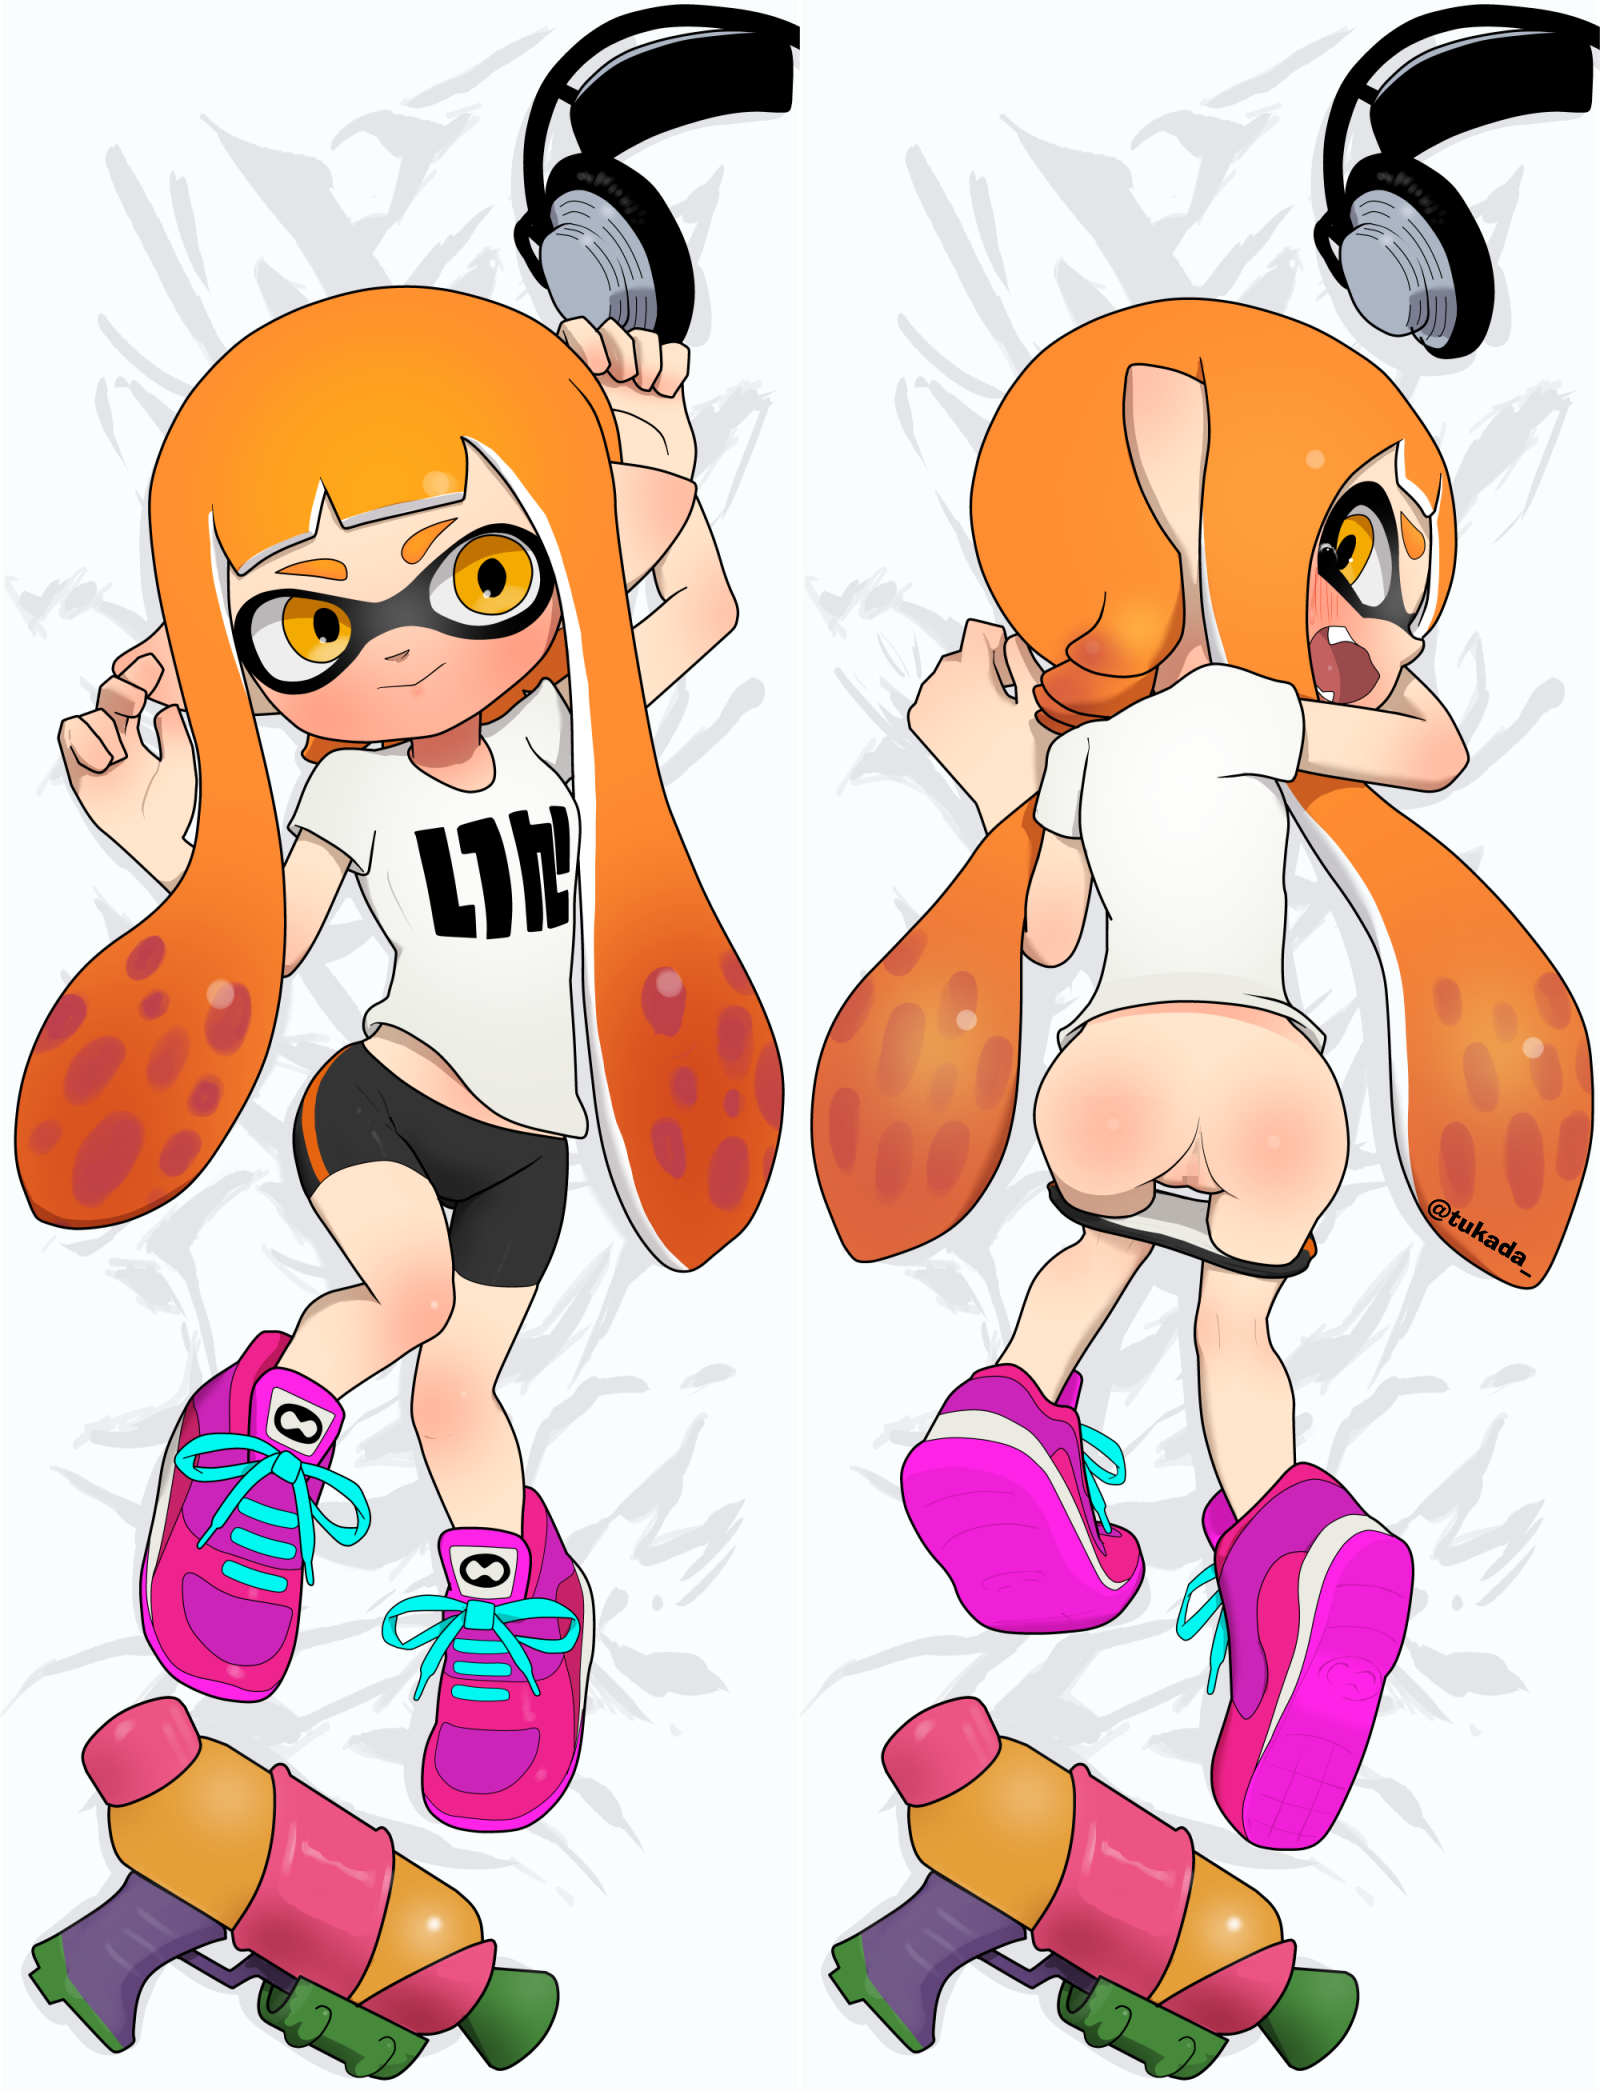 chris marshall sr recommends rule 34 inkling pic